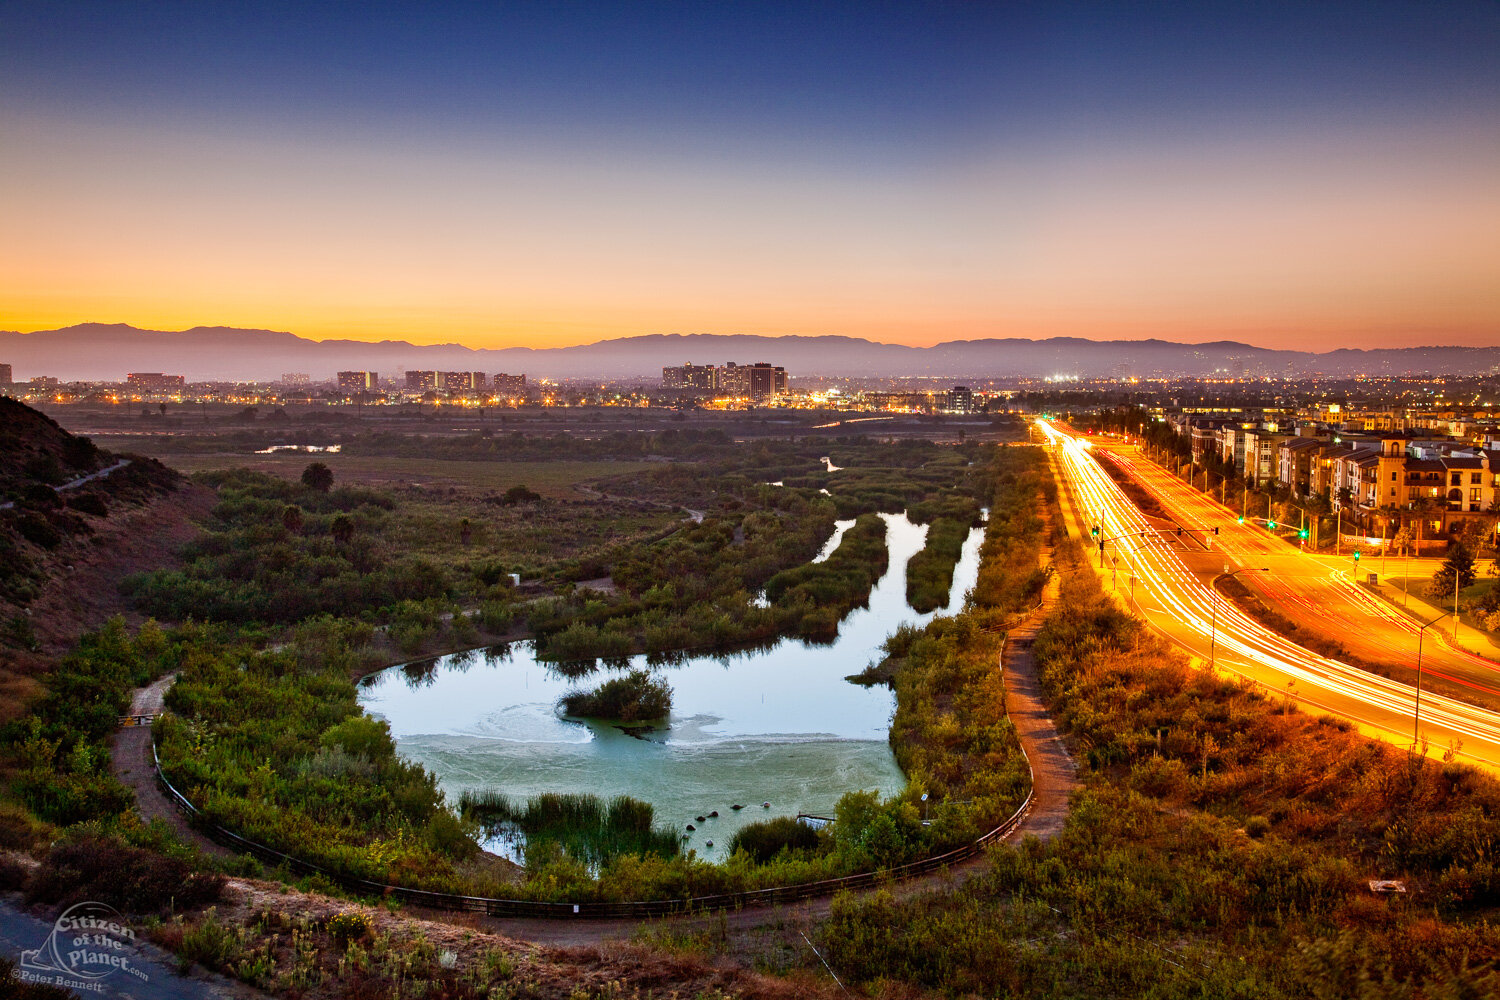  The Freshwater Marsh is at the southern end of the wetlands and borders Lincoln Boulevard and the residential Play Vista Complex. The sun sets over the Santa Monica Mountains in the background. 